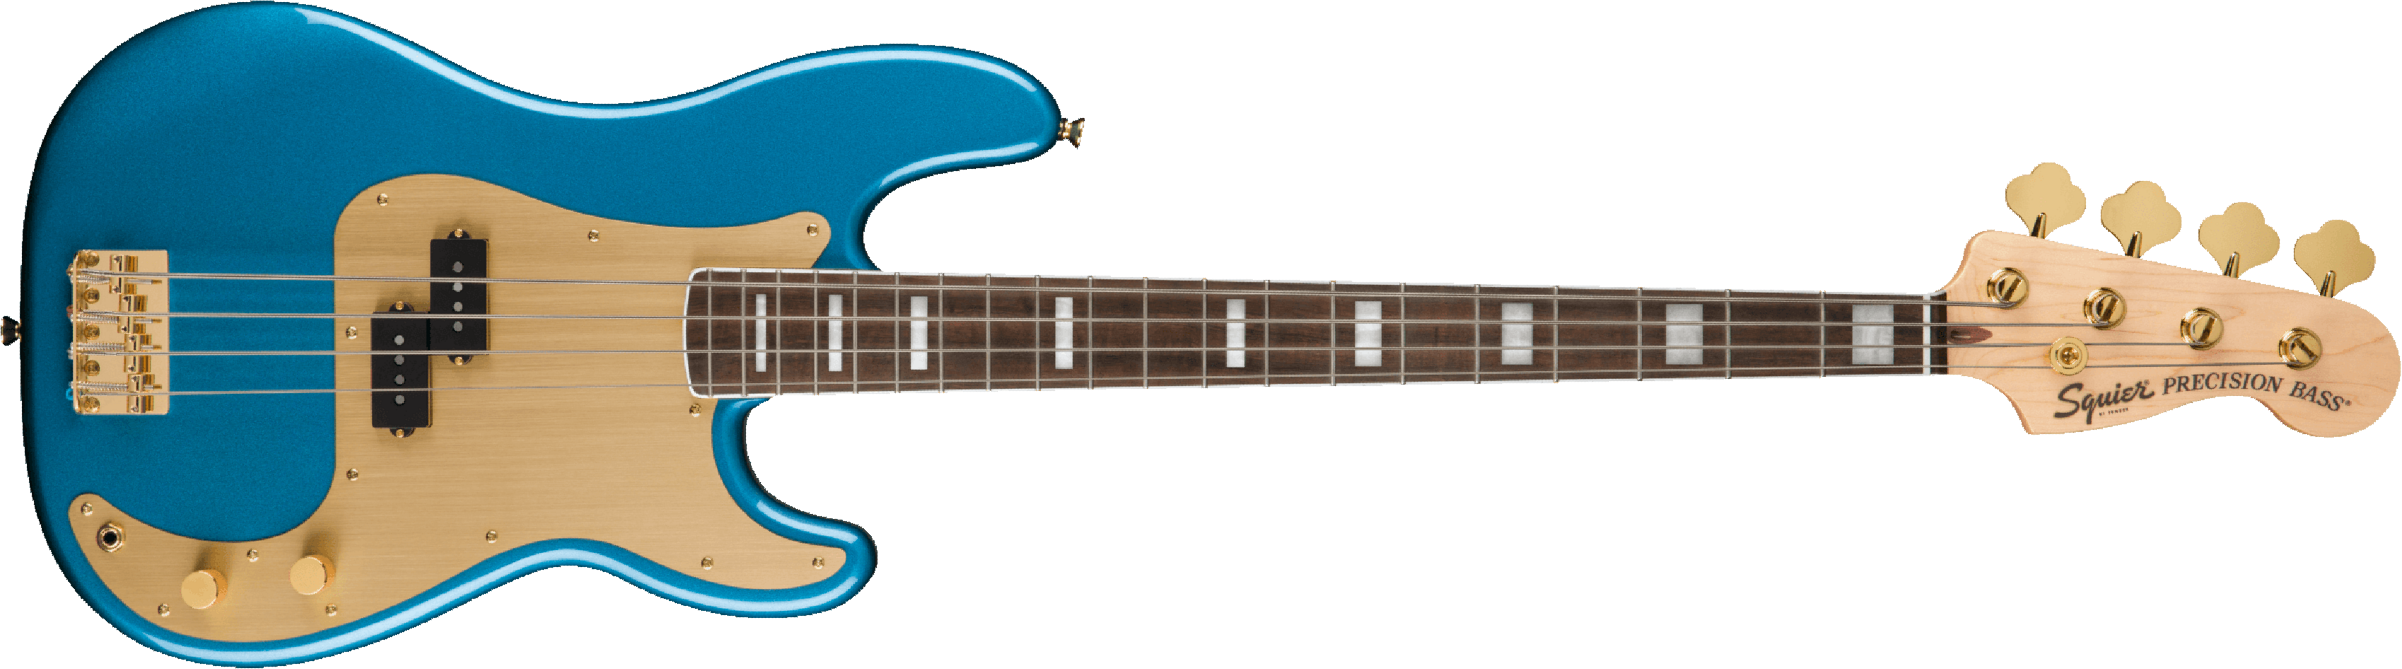 Squier Precision Bass 40th Anniversary Gold Edition Lau - Lake Placid Blue - Solid body electric bass - Main picture